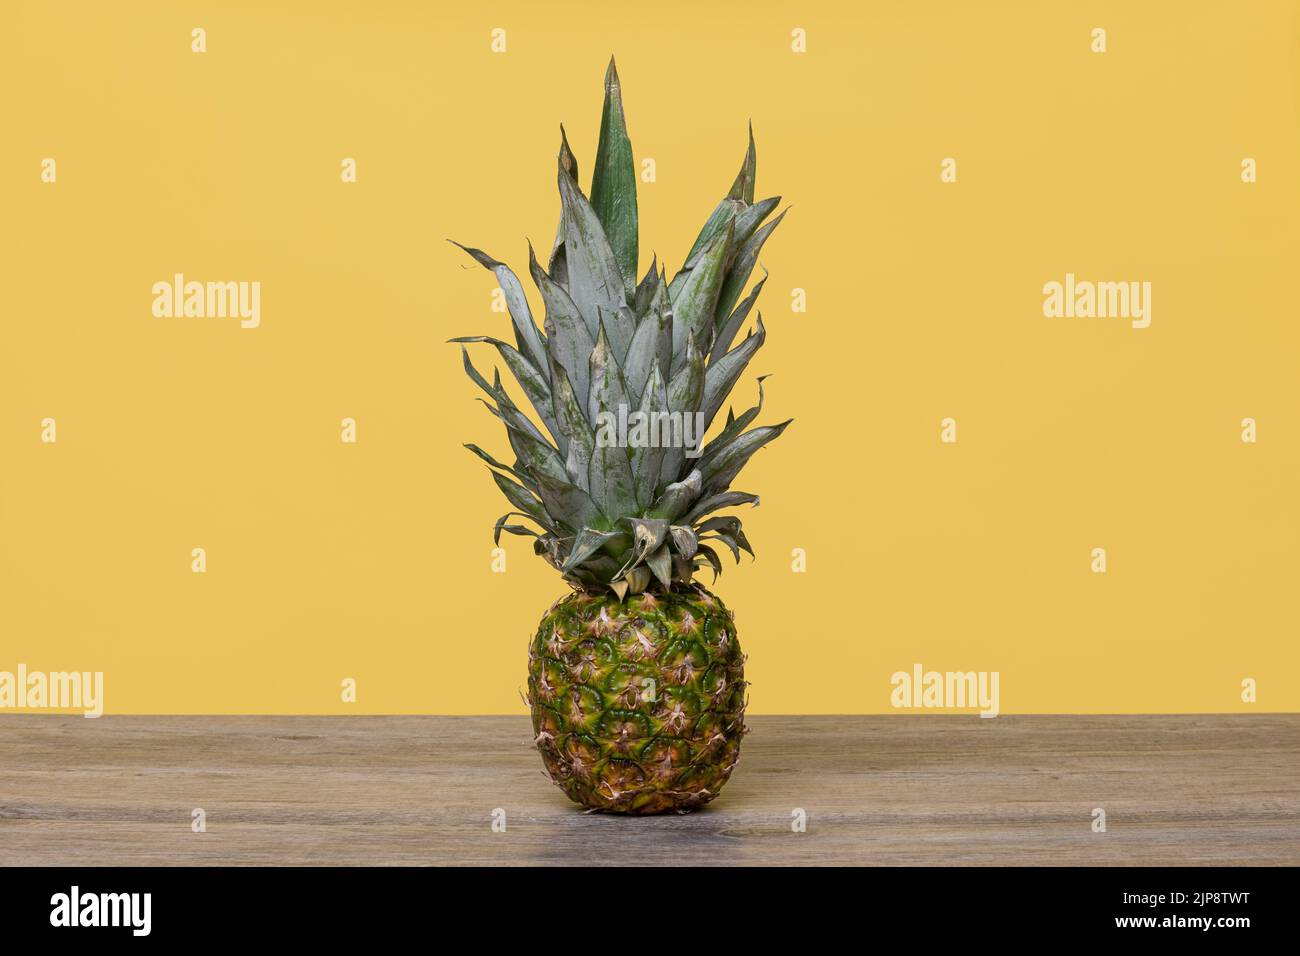 Pineapple on a wooden table with a yellow background, whole. Stock Photo